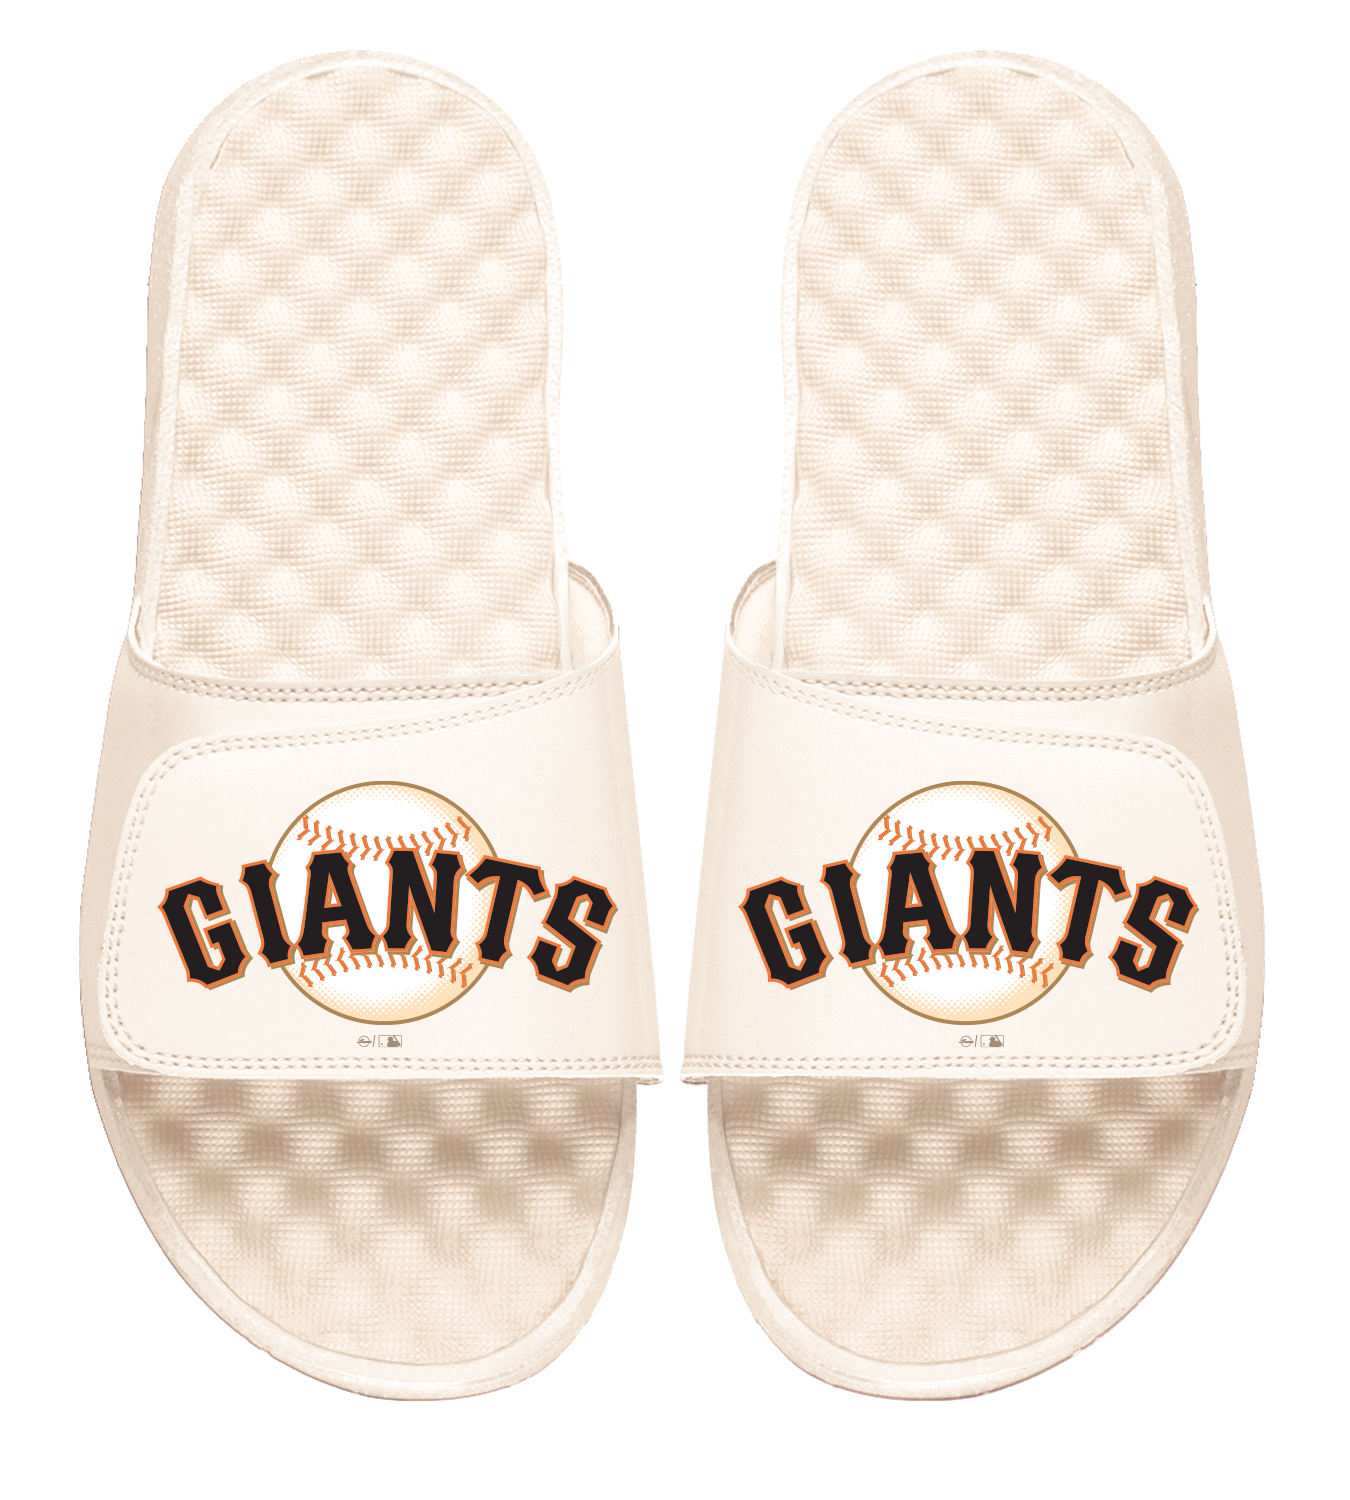 Loudmouth's BRAND NEW Retro San Francisco Giants pattern is now